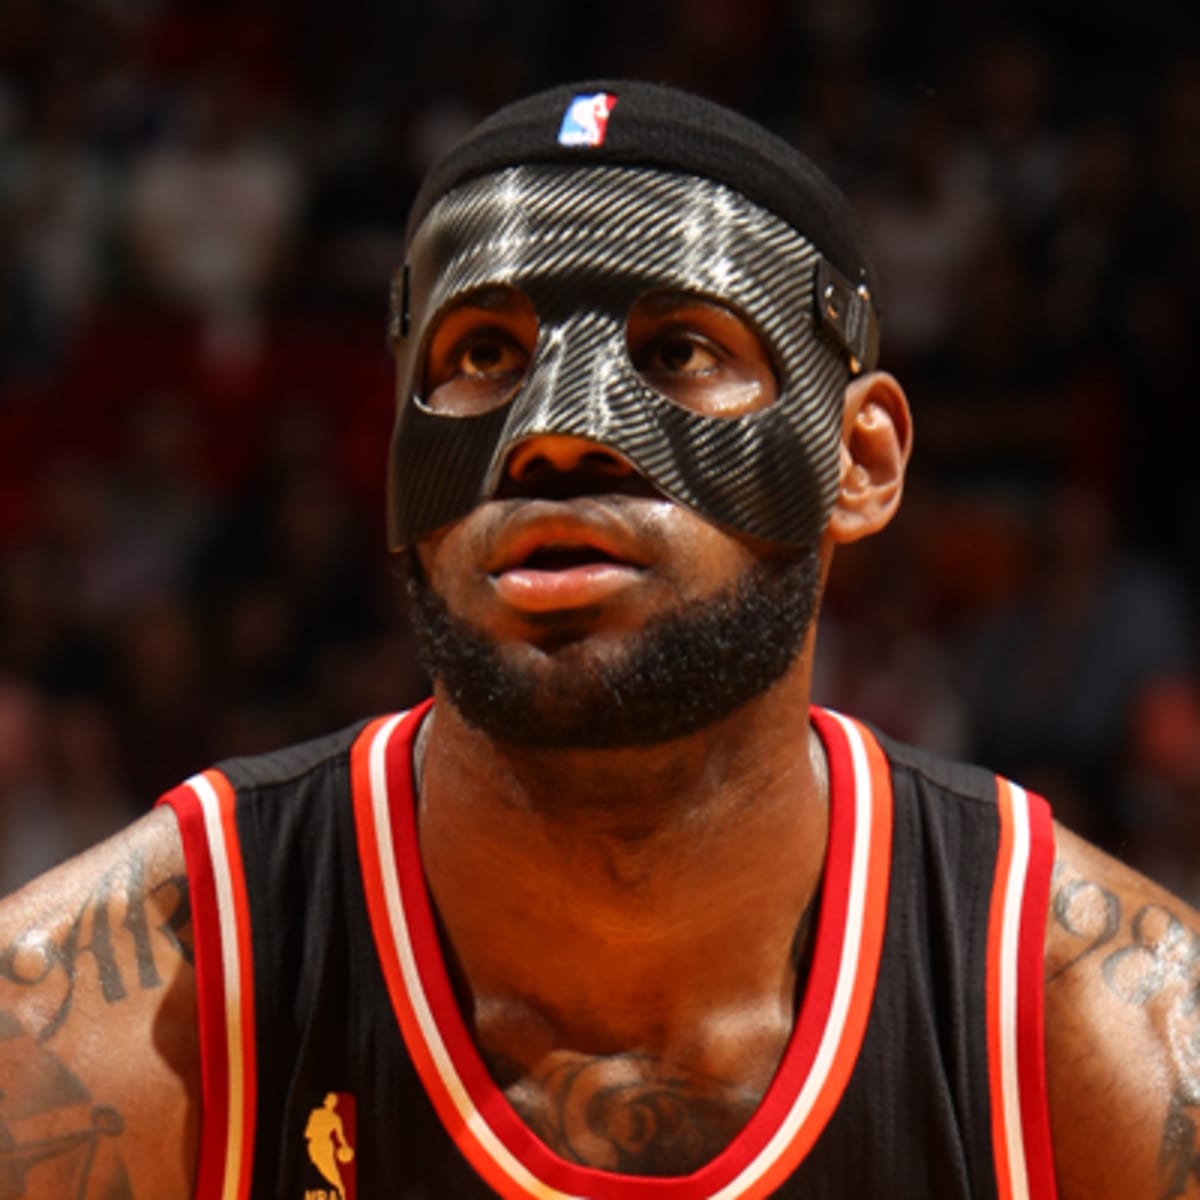 LeBron James wears black to cover nose Heat beat Knicks - Sports Illustrated